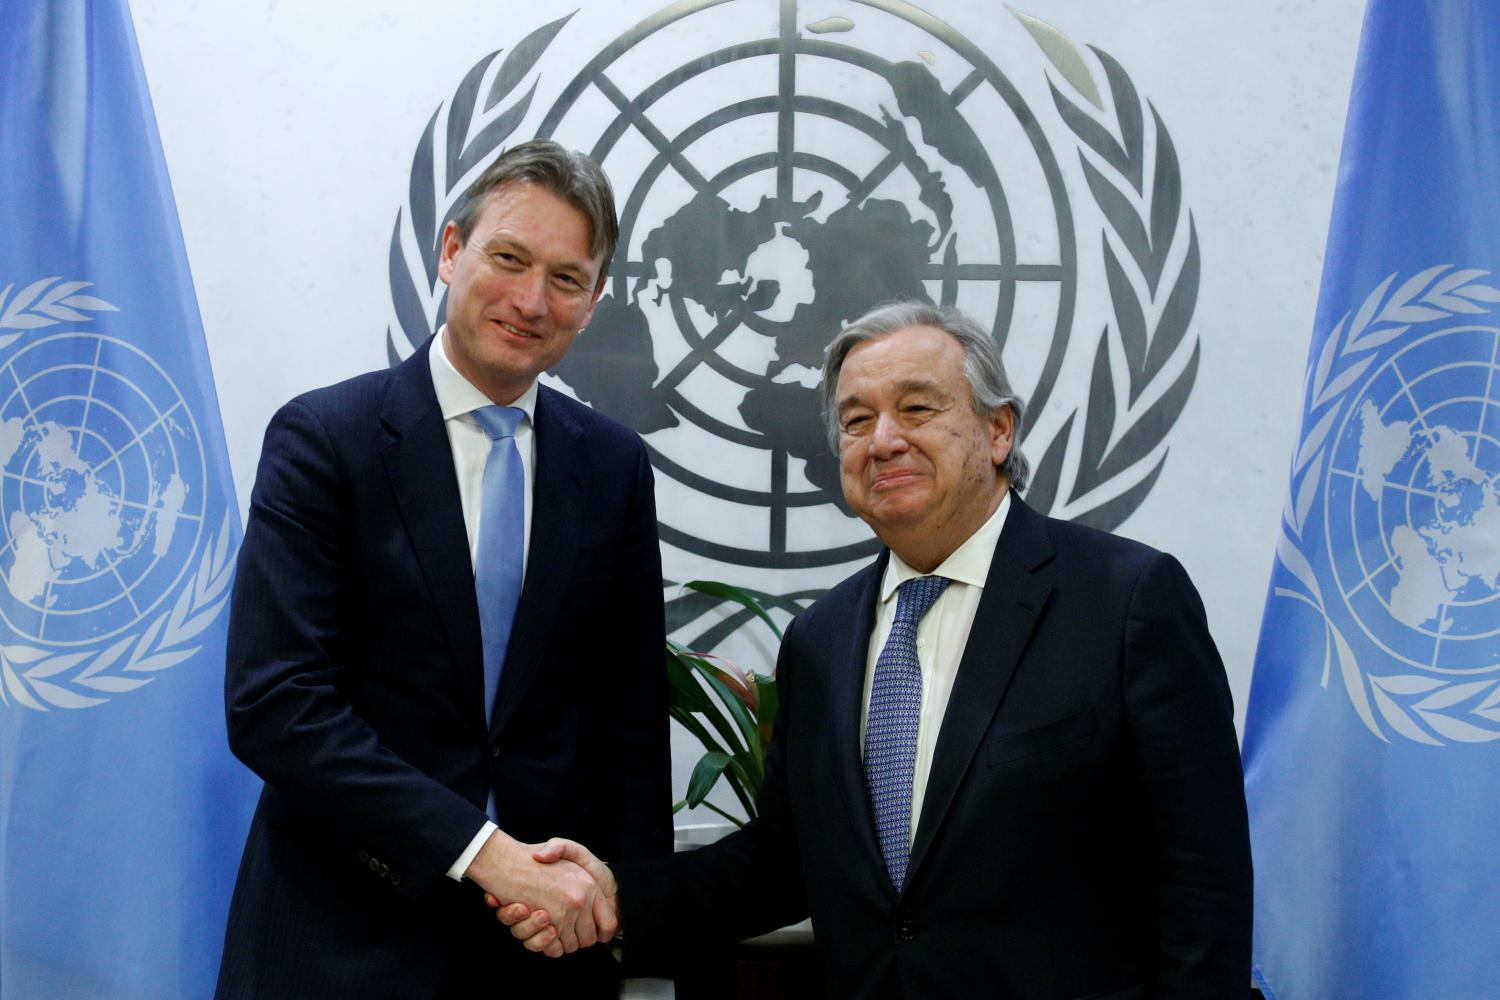 Dutch Foreign Minister Halbe Zijlstra meets with the United Nations Secretary-General Antonio Guterres U.N. headquarters in New York City, New York, U.S., December 15, 2017. REUTERS/Brendan McDermid